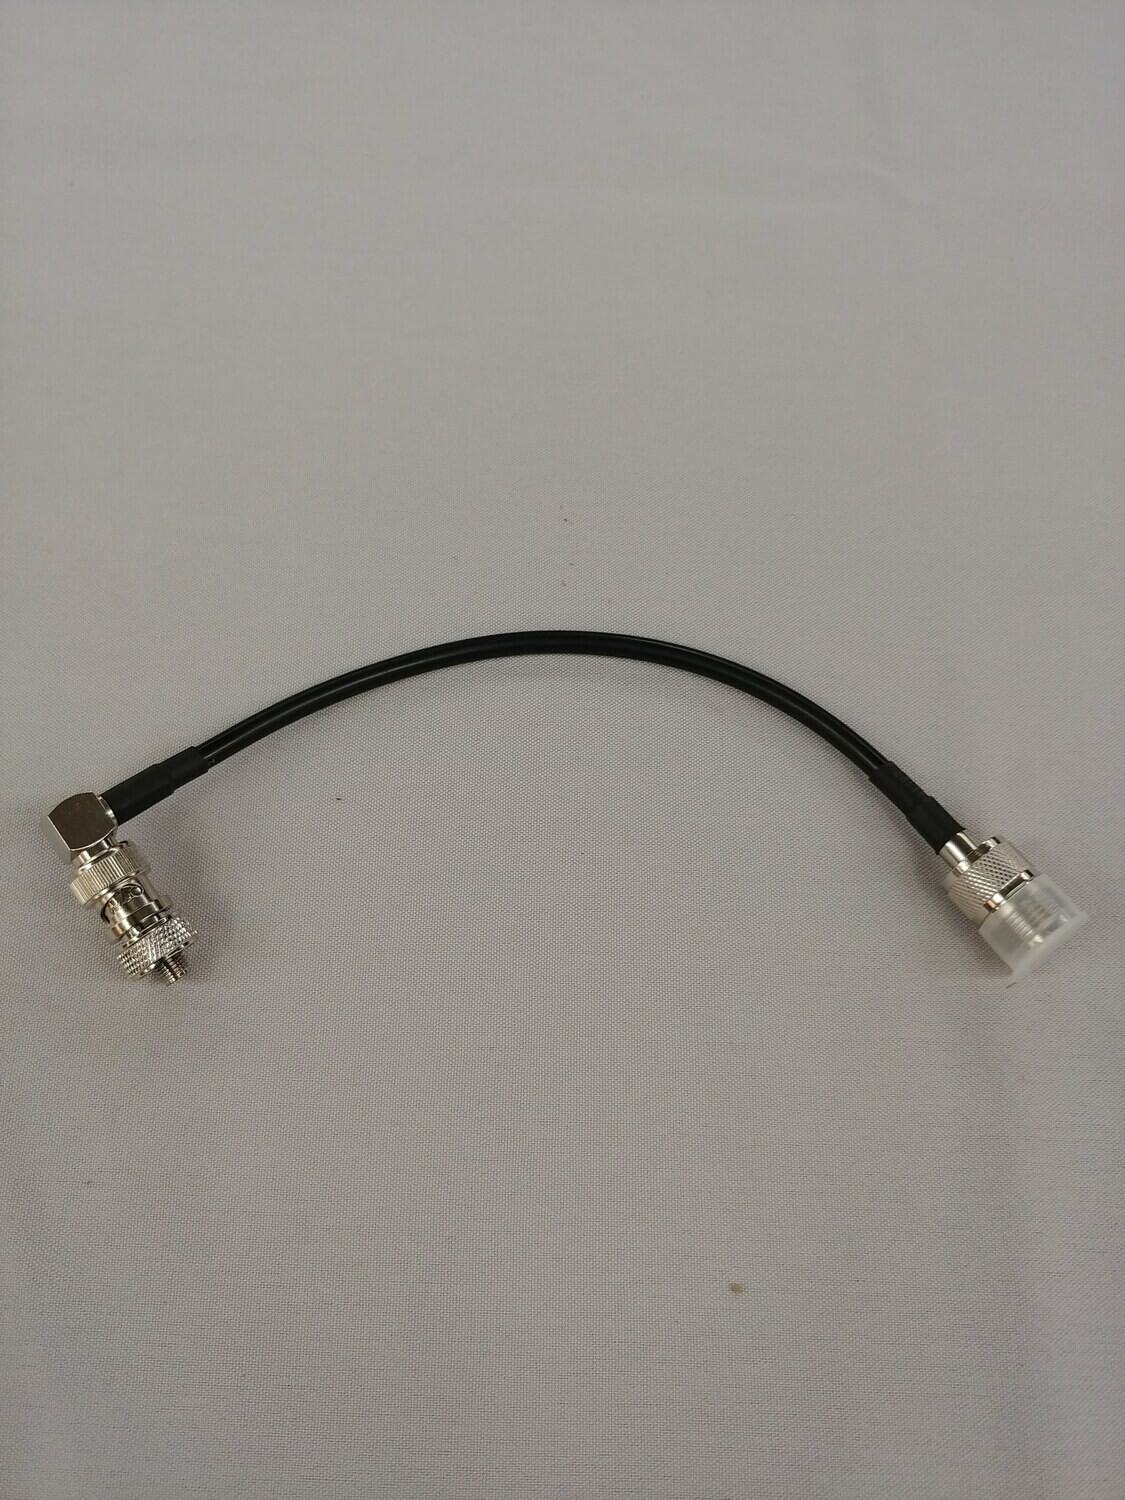 Various RF Pigtails or Short Coaxial Cable Adapters